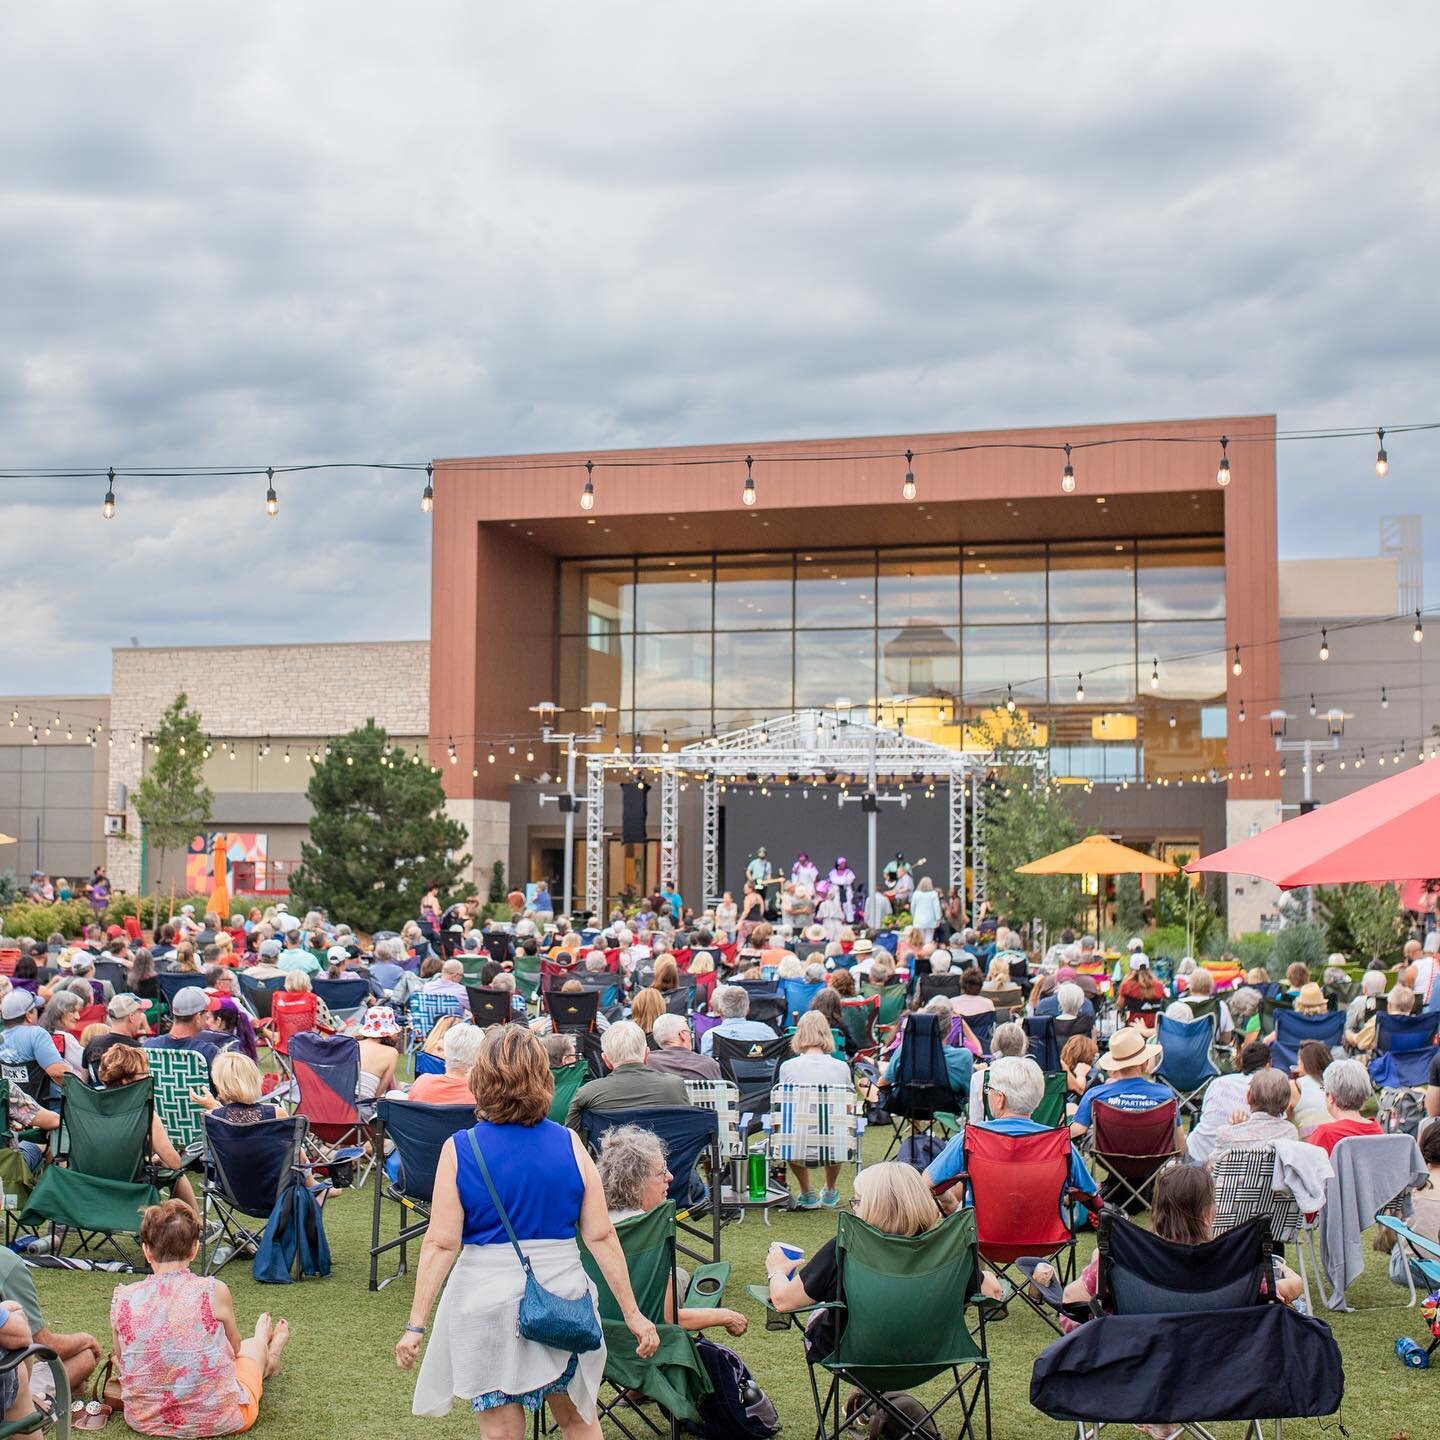 Mark your calendars to join us for Blues Night with the High Plains Blues Society Friday evening from 6:30-8:30pm🎶

Grab your lawn chairs + blankets and we&rsquo;ll see you tomorrow! #shopfoothills